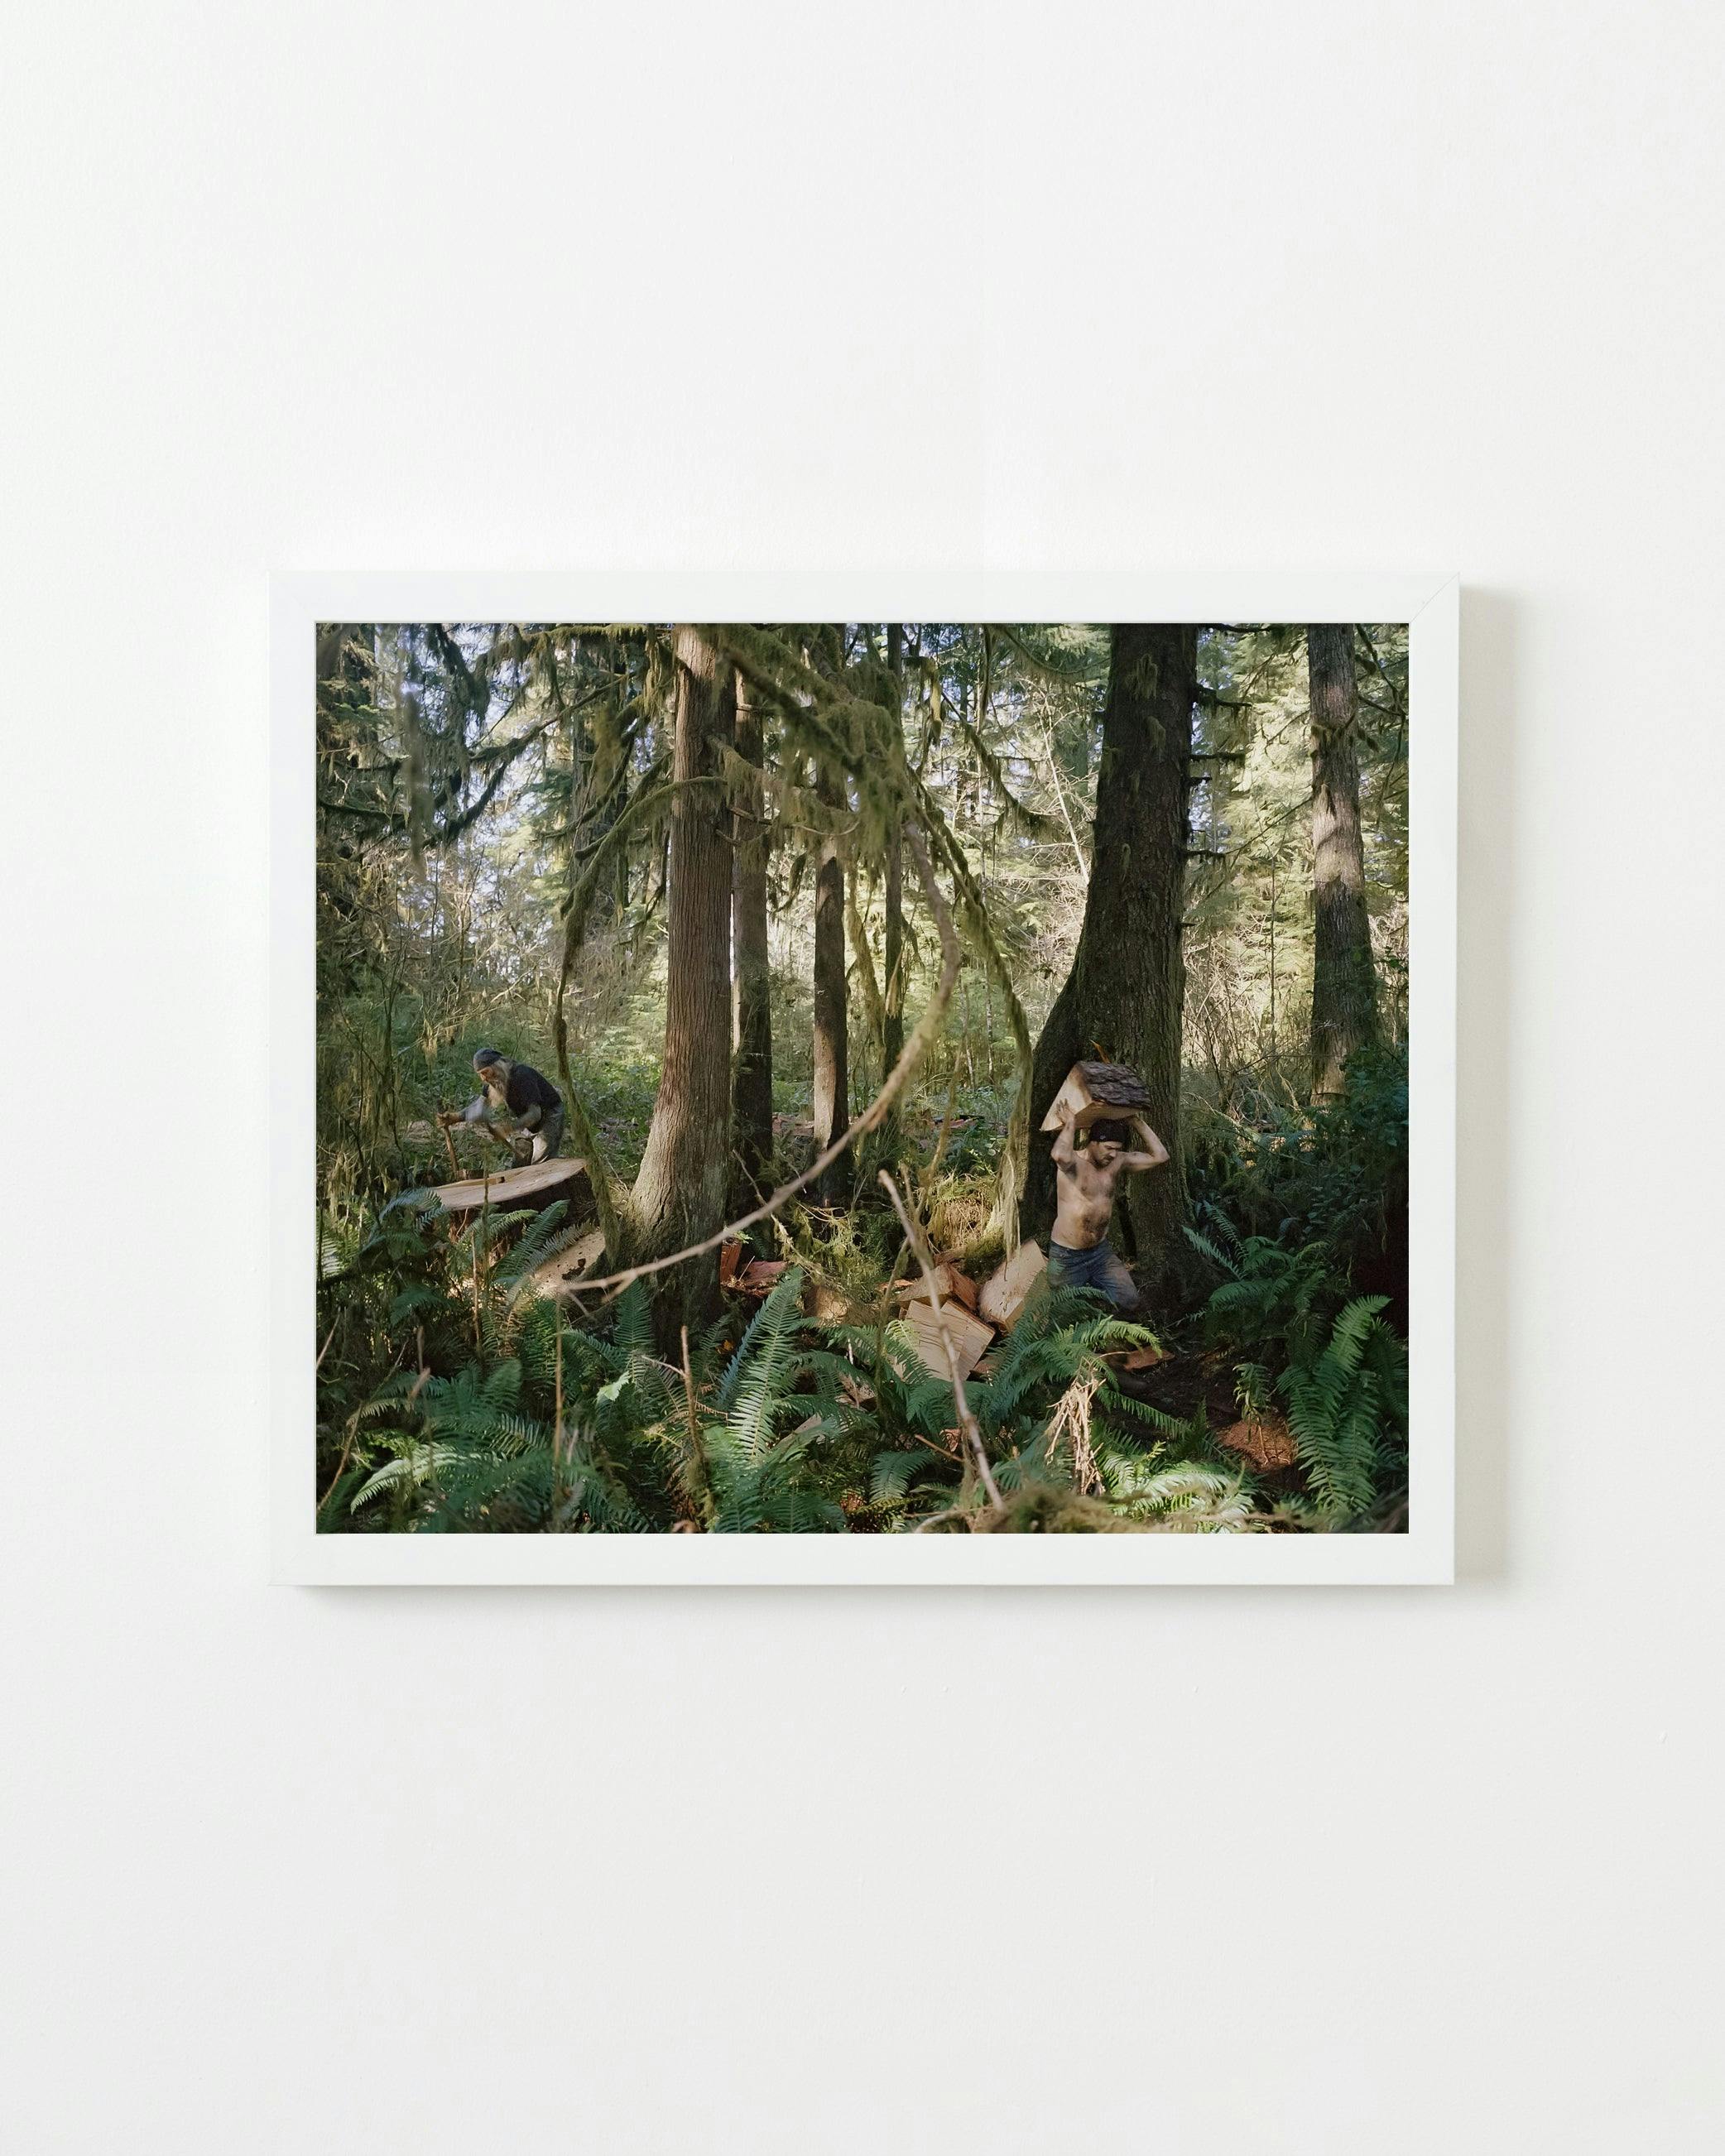 Photography by Anna Beeke titled "The Woodcutters".